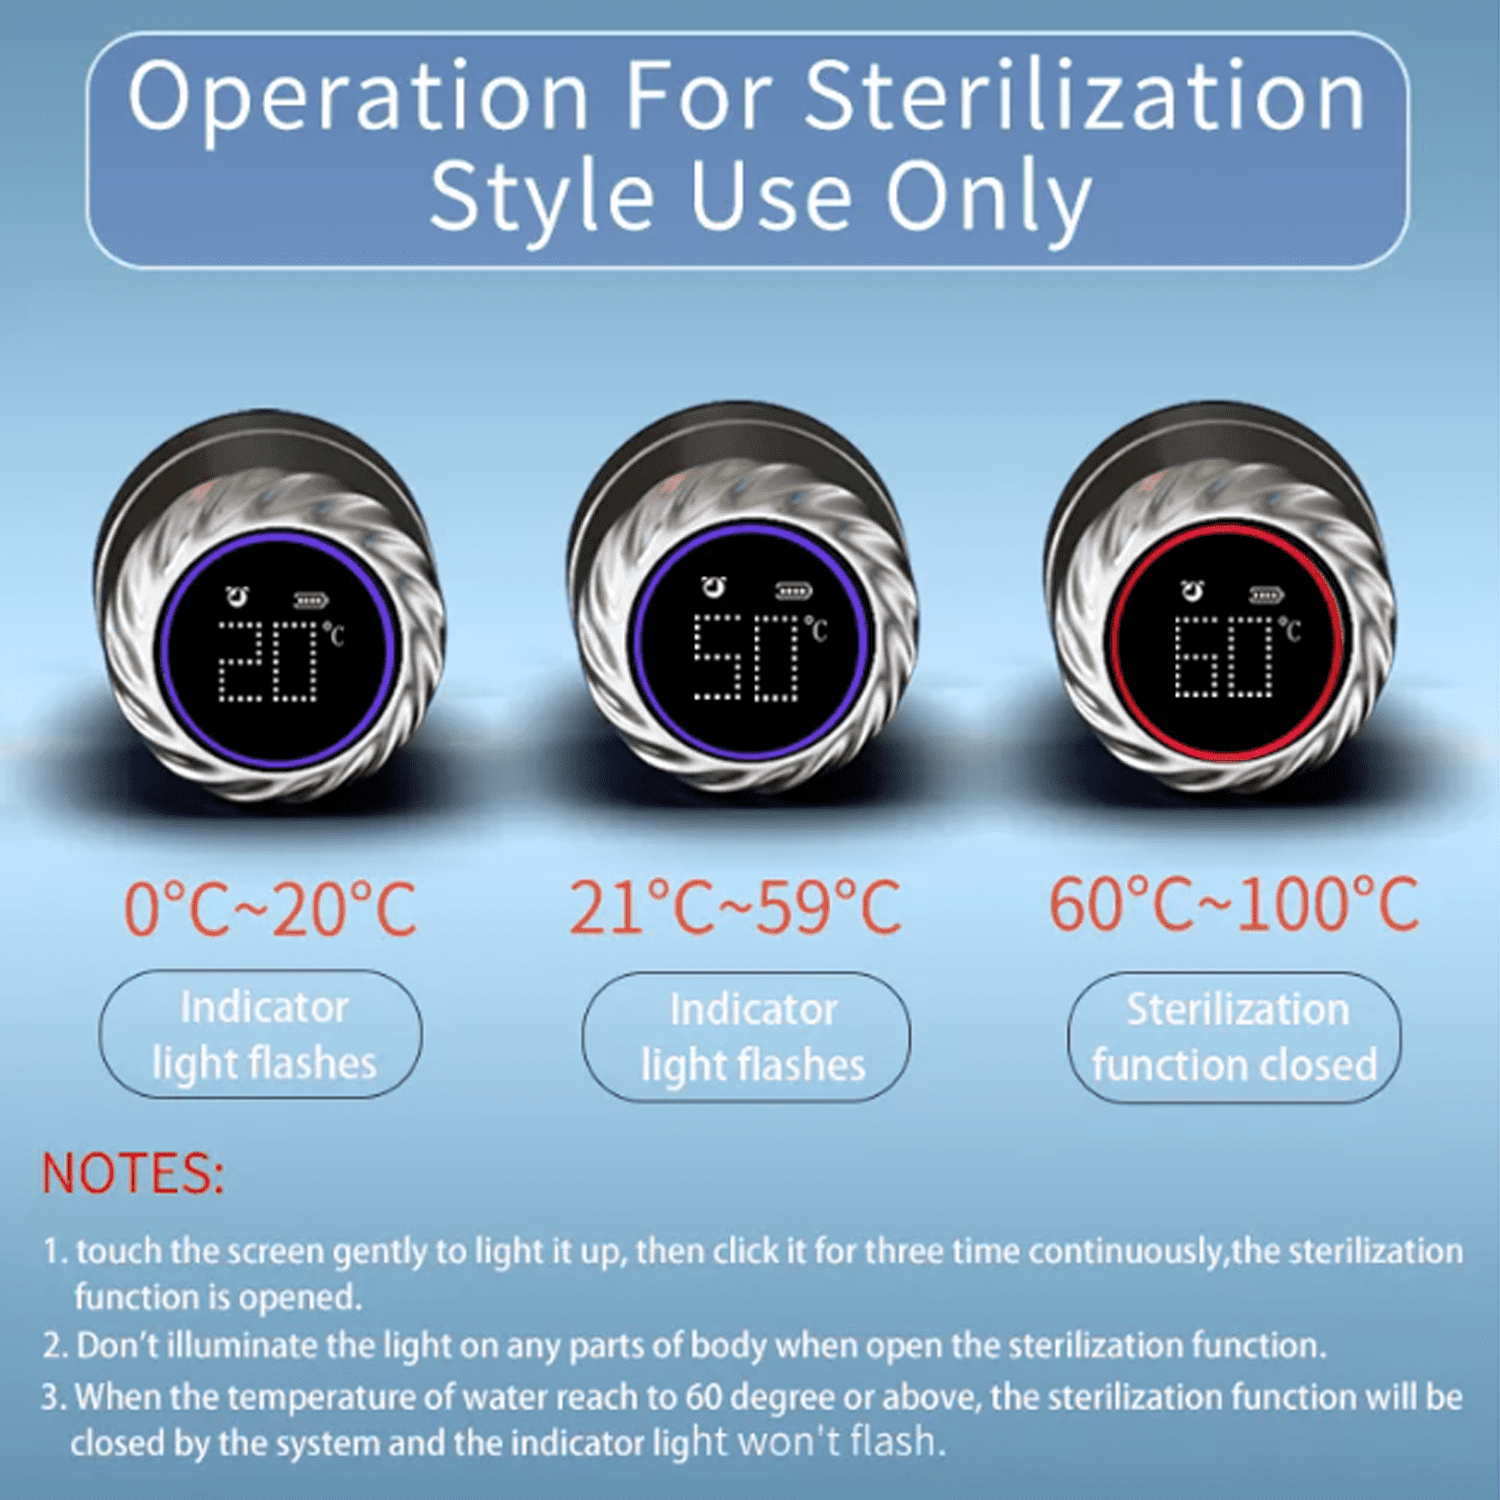 Self Cleaning Smart Water Bottle with UV Sterilization and Touch Control